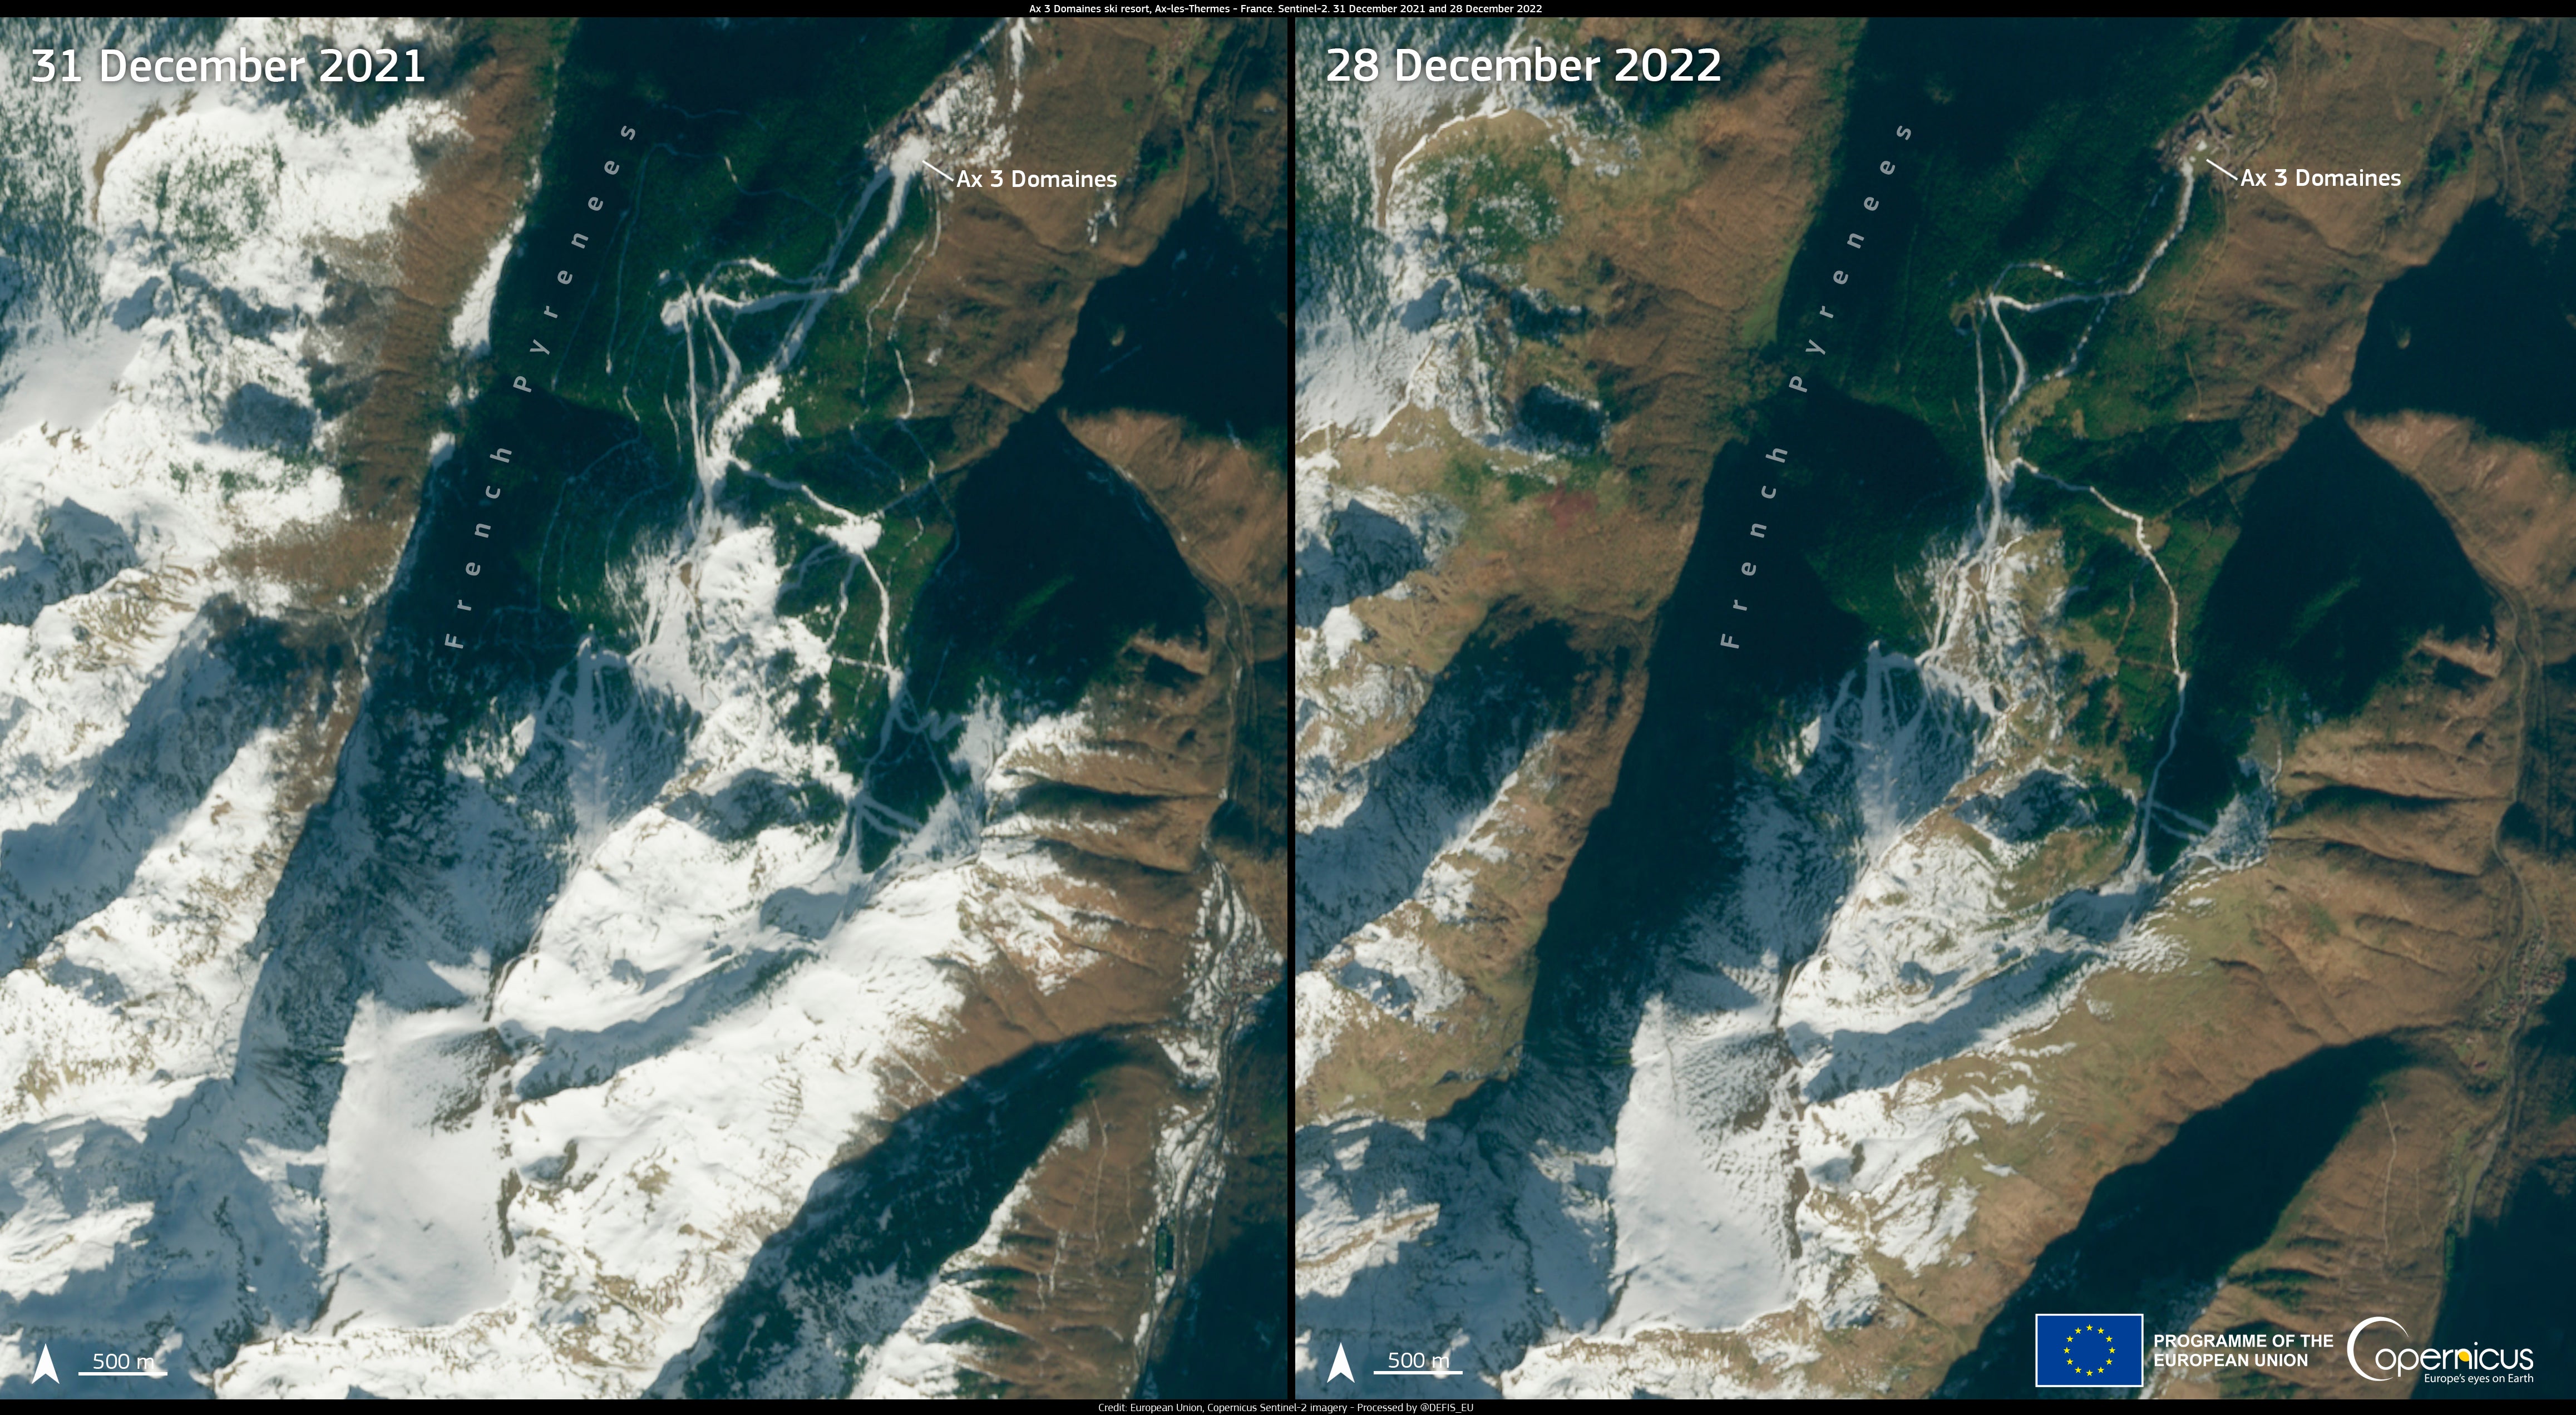 January 2023 began with a significant heatwave in Europe and sparse snowfall in both the Alps and the Pyrenees. Difference in snow cover is visible when comparing images from December 2021 and December 2022, in Ax-les-Thermes in the Pyrenees of southern France